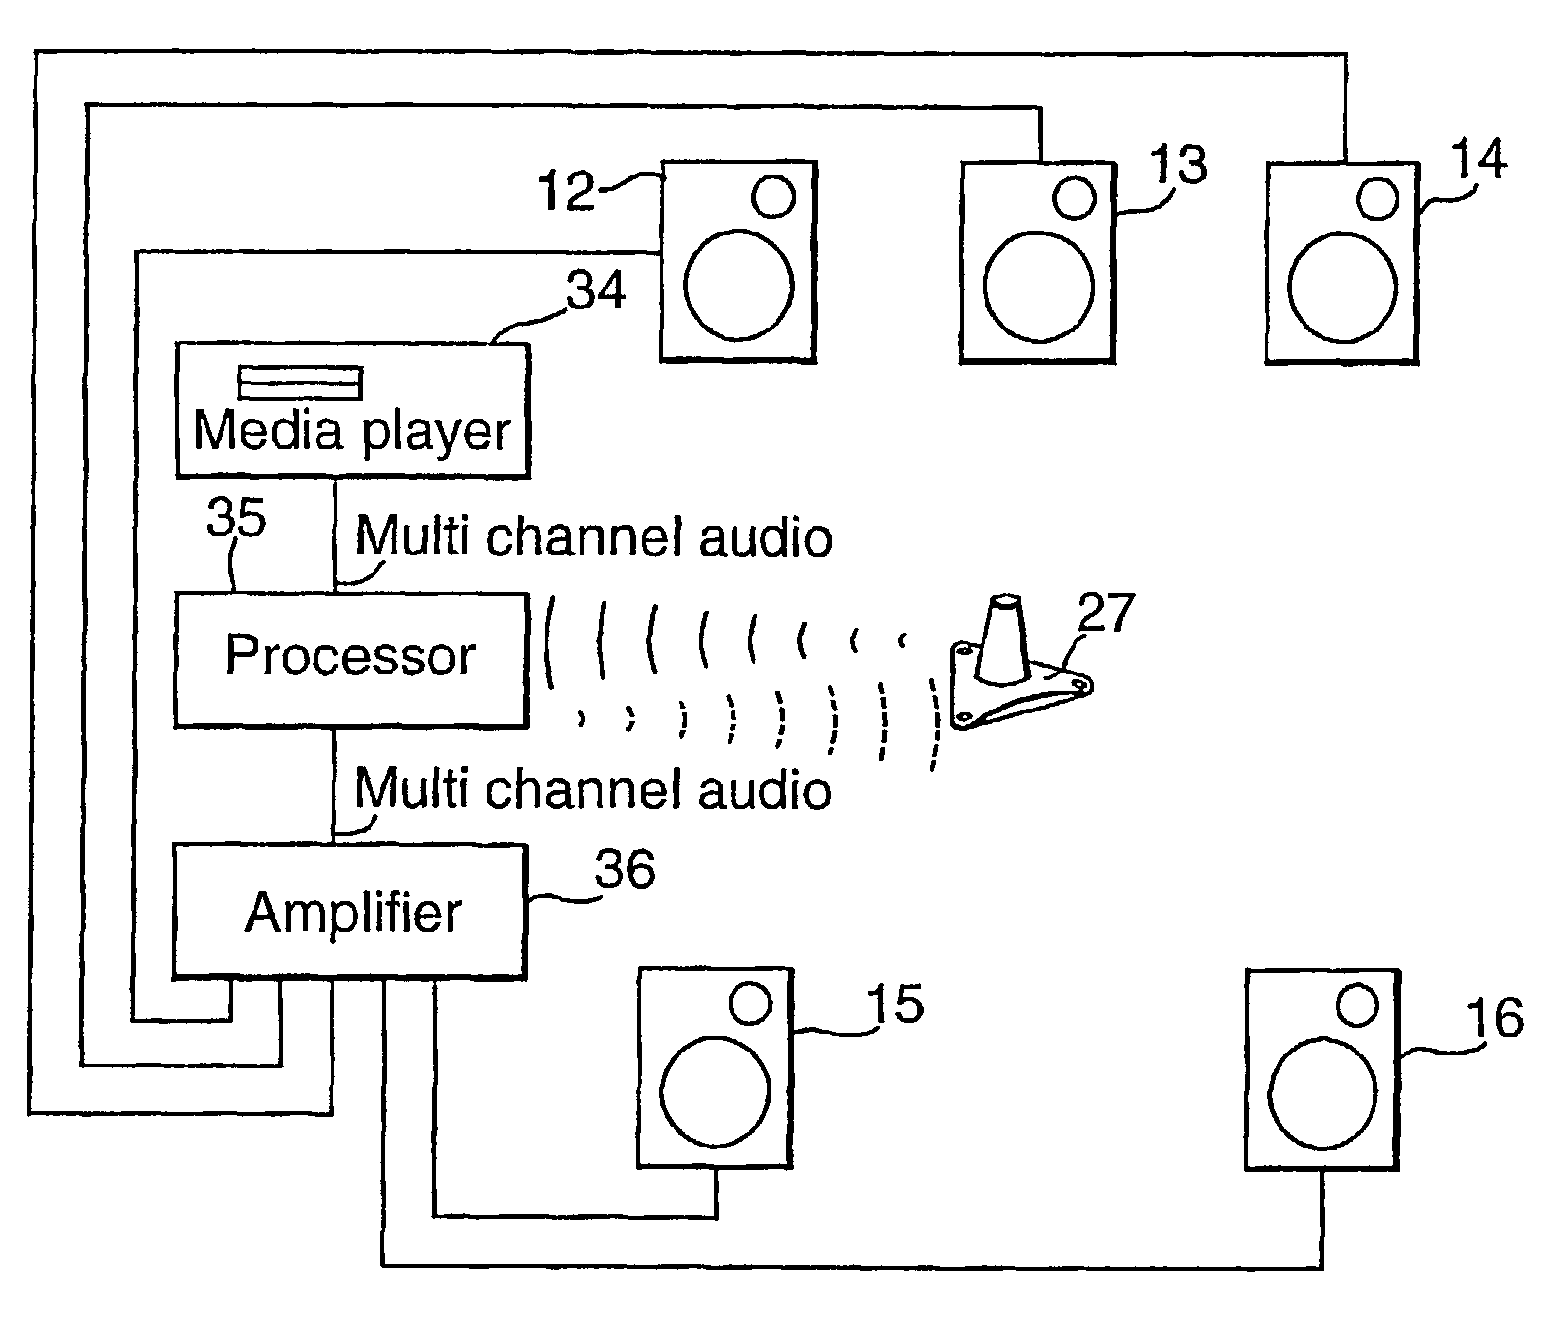 System and method for optimization of three-dimensional audio